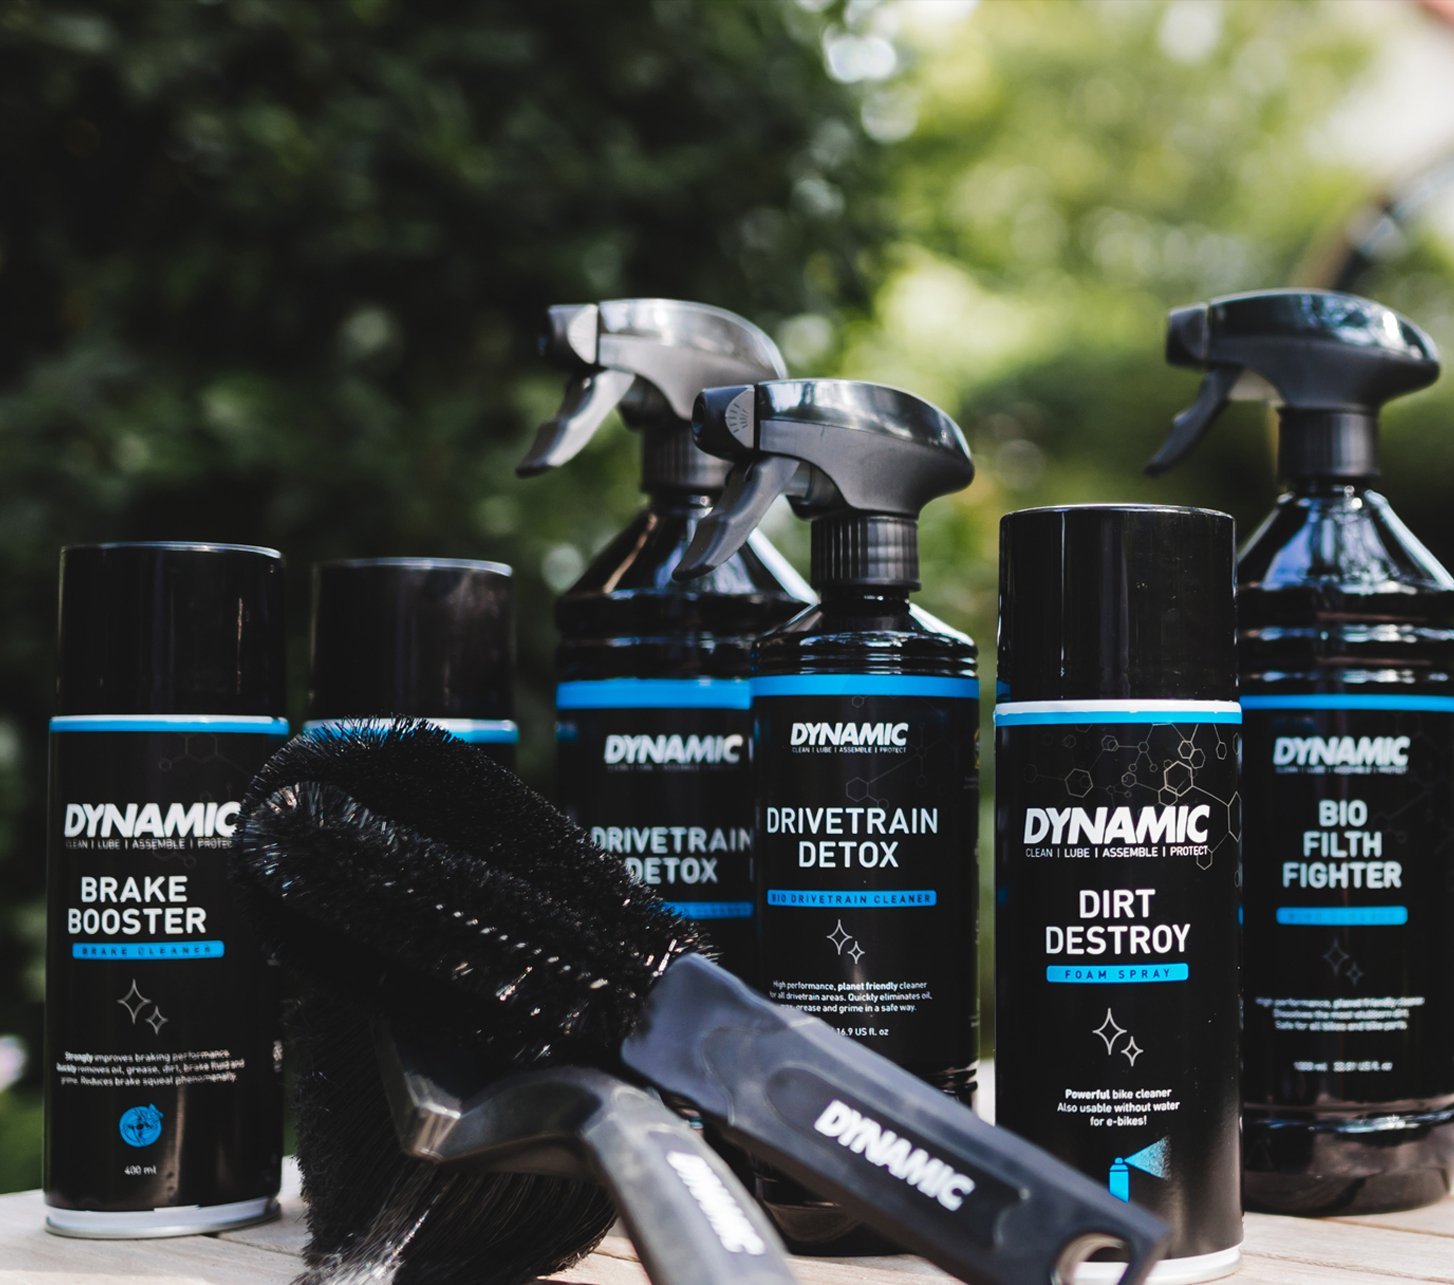 Dynamic Bike Care Products